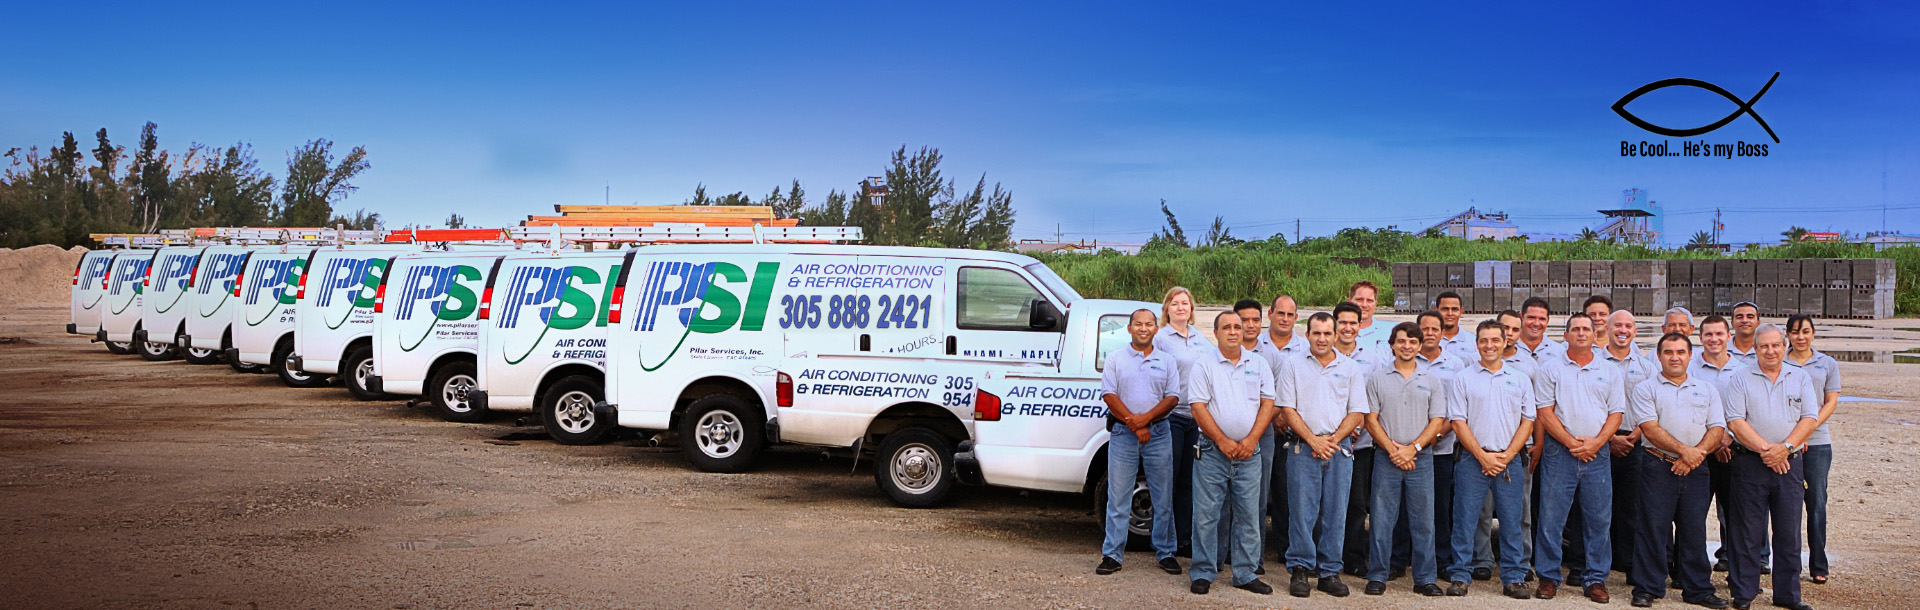 Pilar Services trucks and staff members.